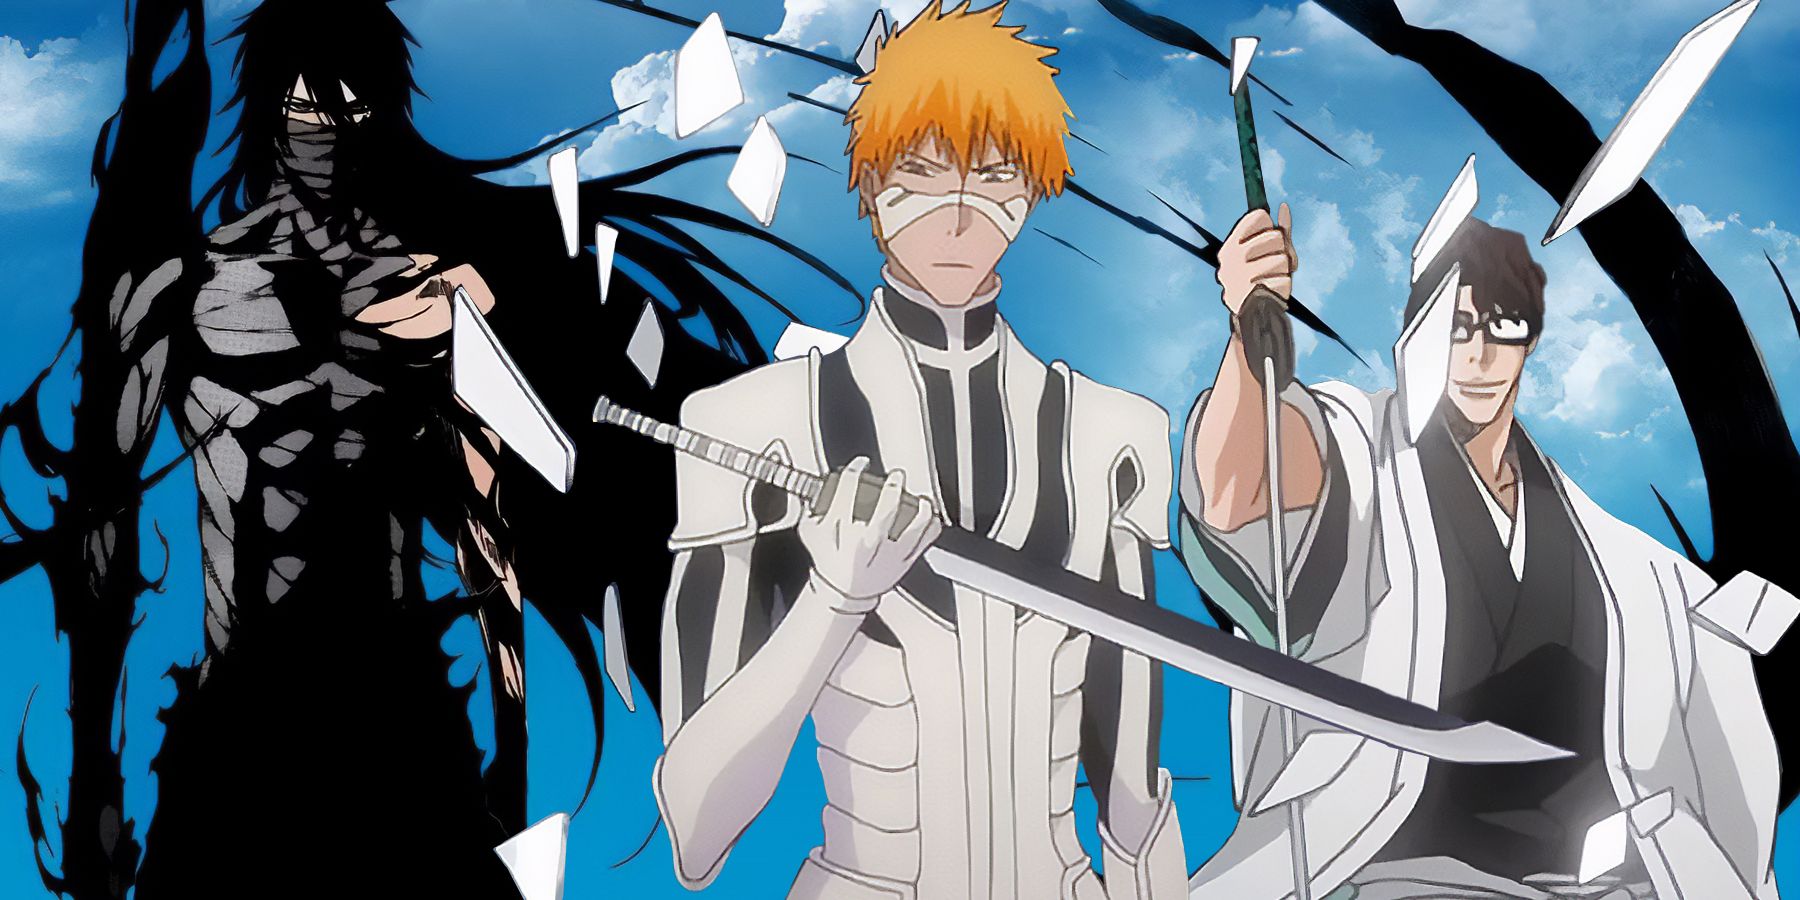 A collage of different characters from Bleach